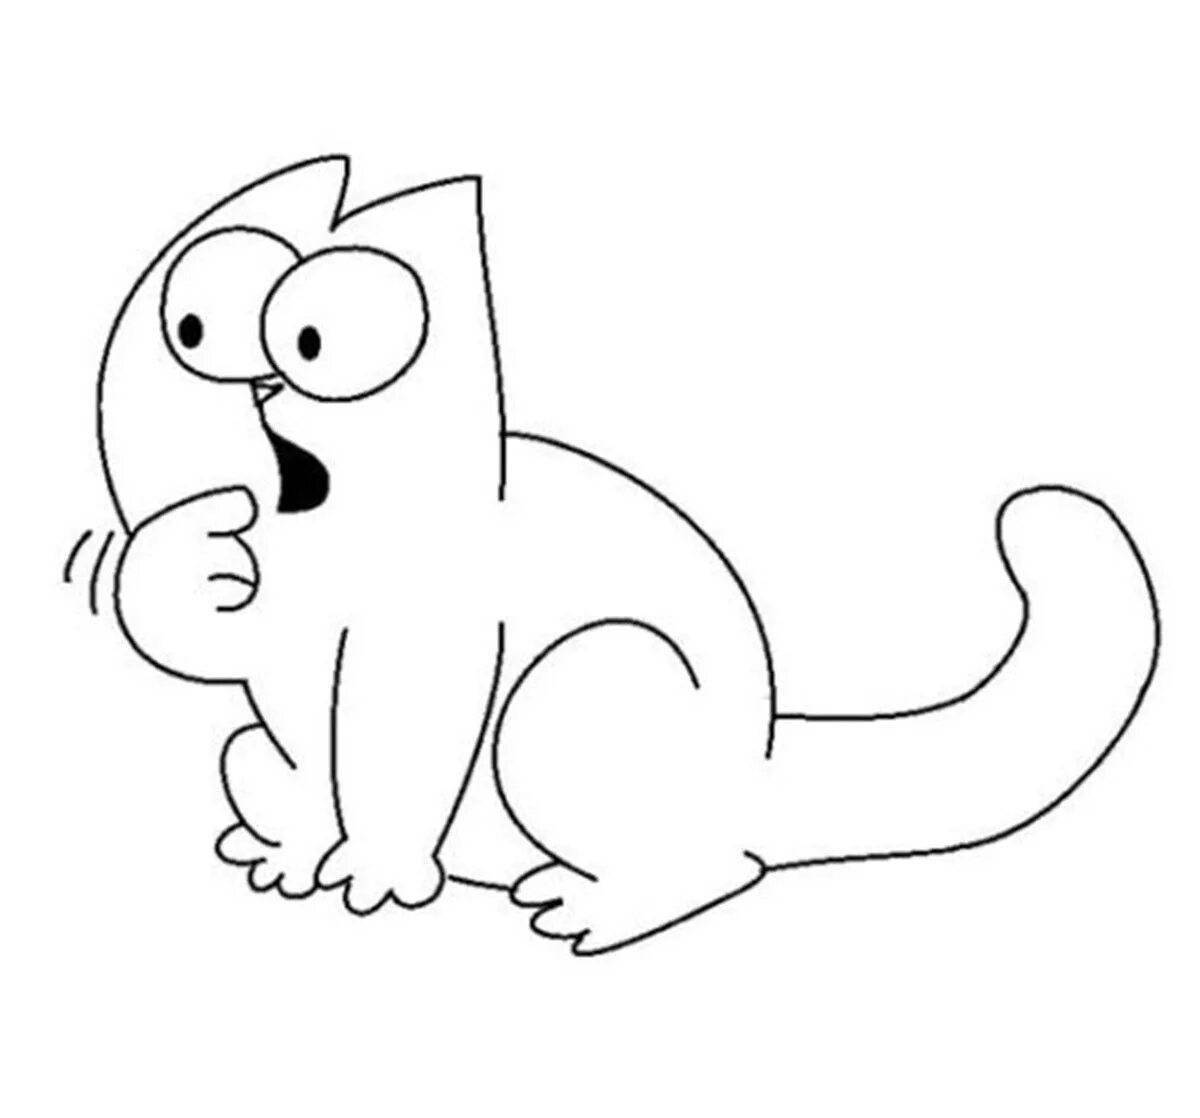 Playful Cardboard Cat Coloring Page for Toddlers